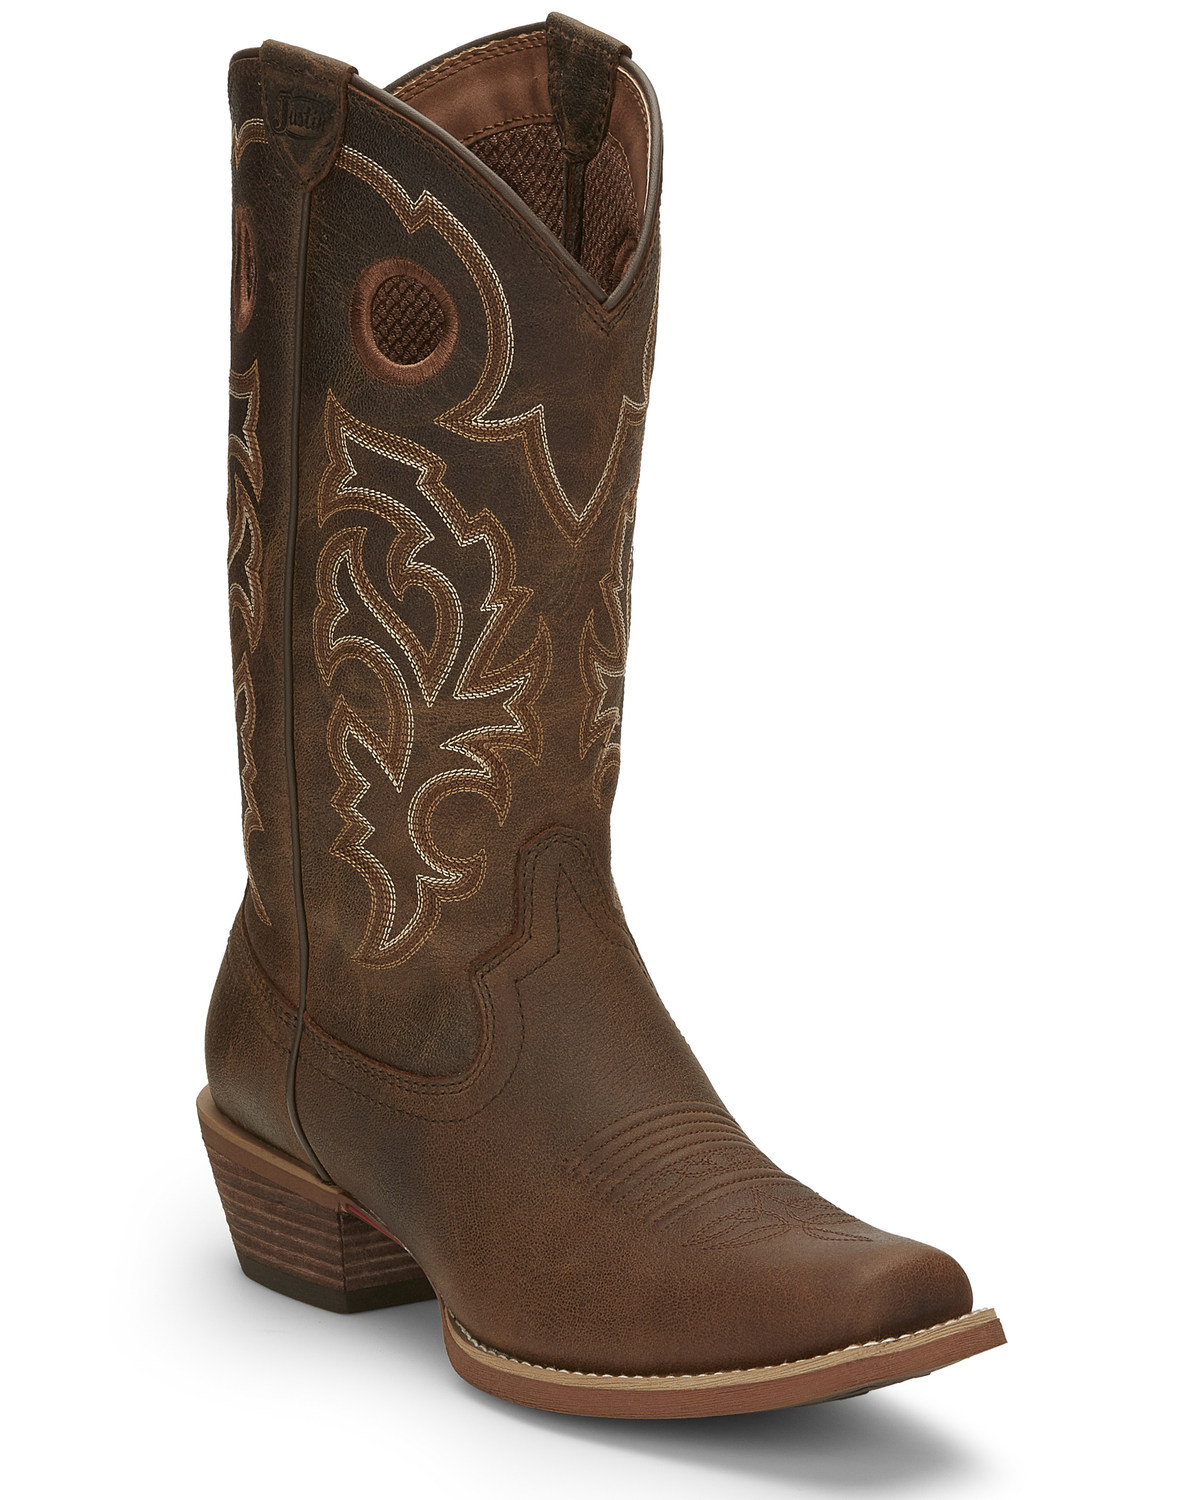 Justin Men's Puncher Brown Western Boots - Broad Square Toe